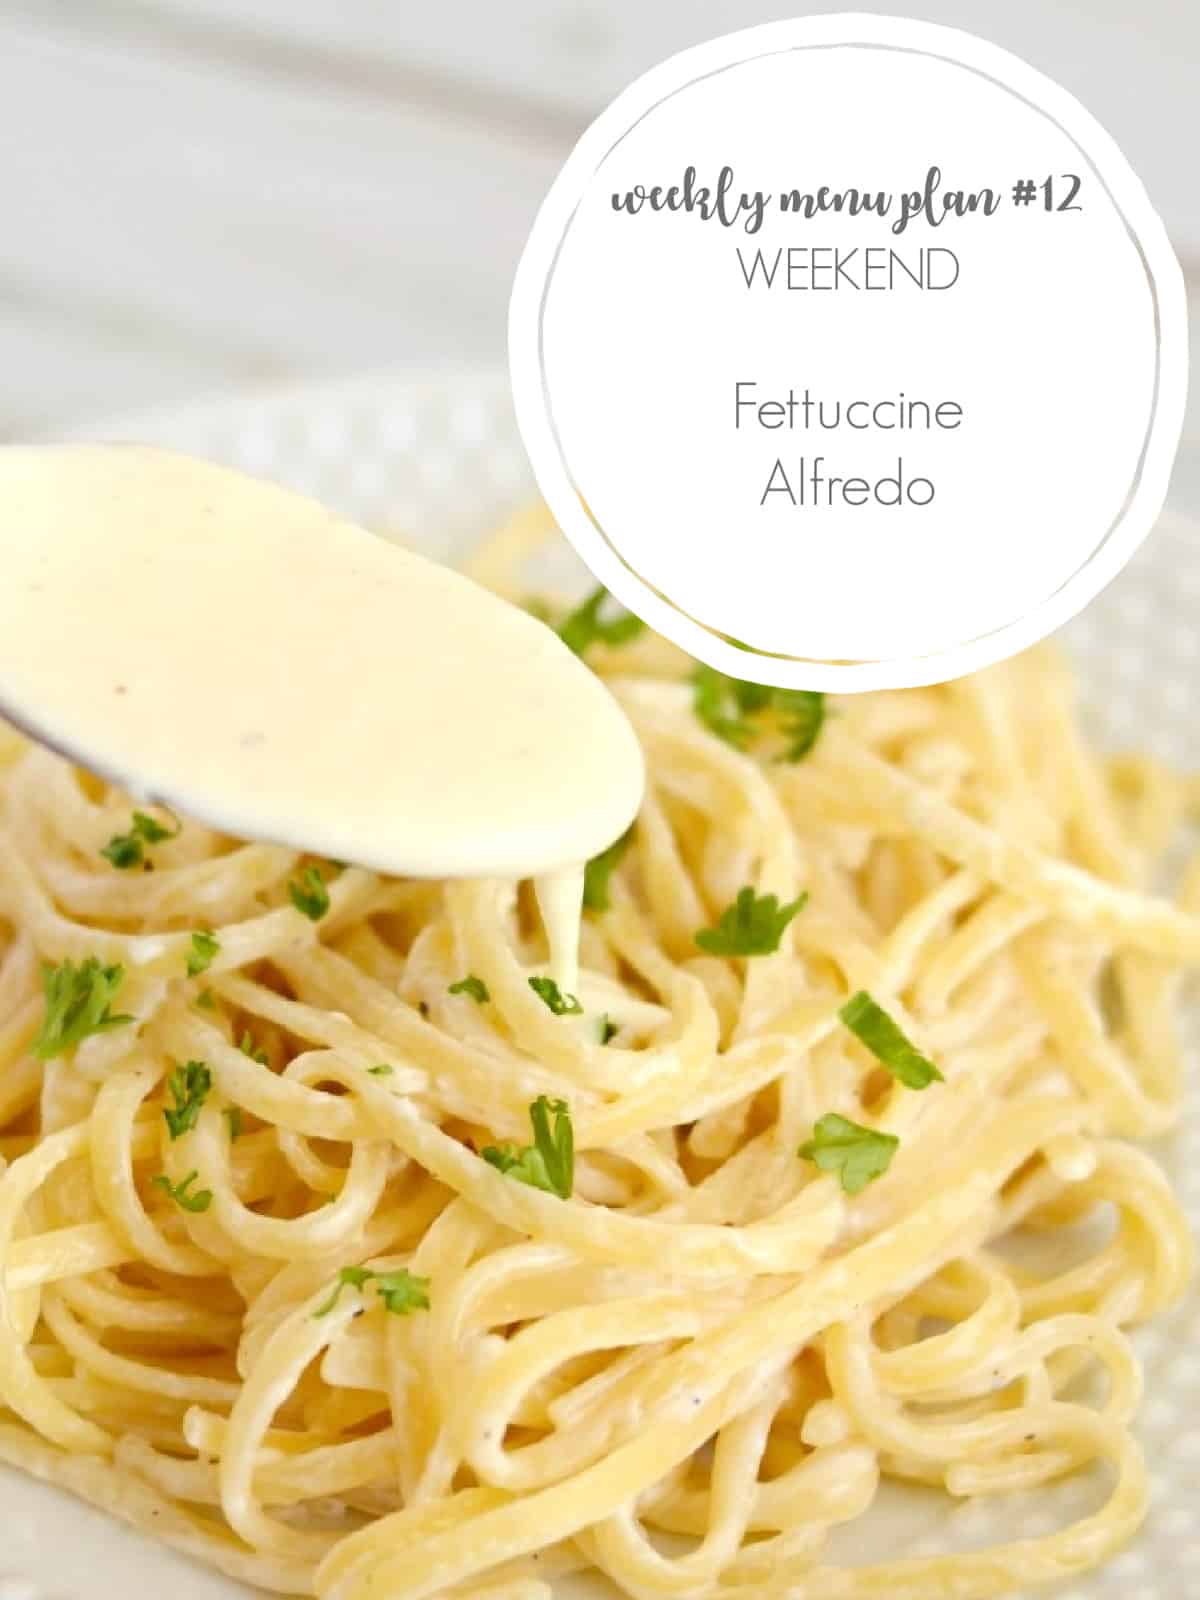 alfredo sauce for meal plan #12